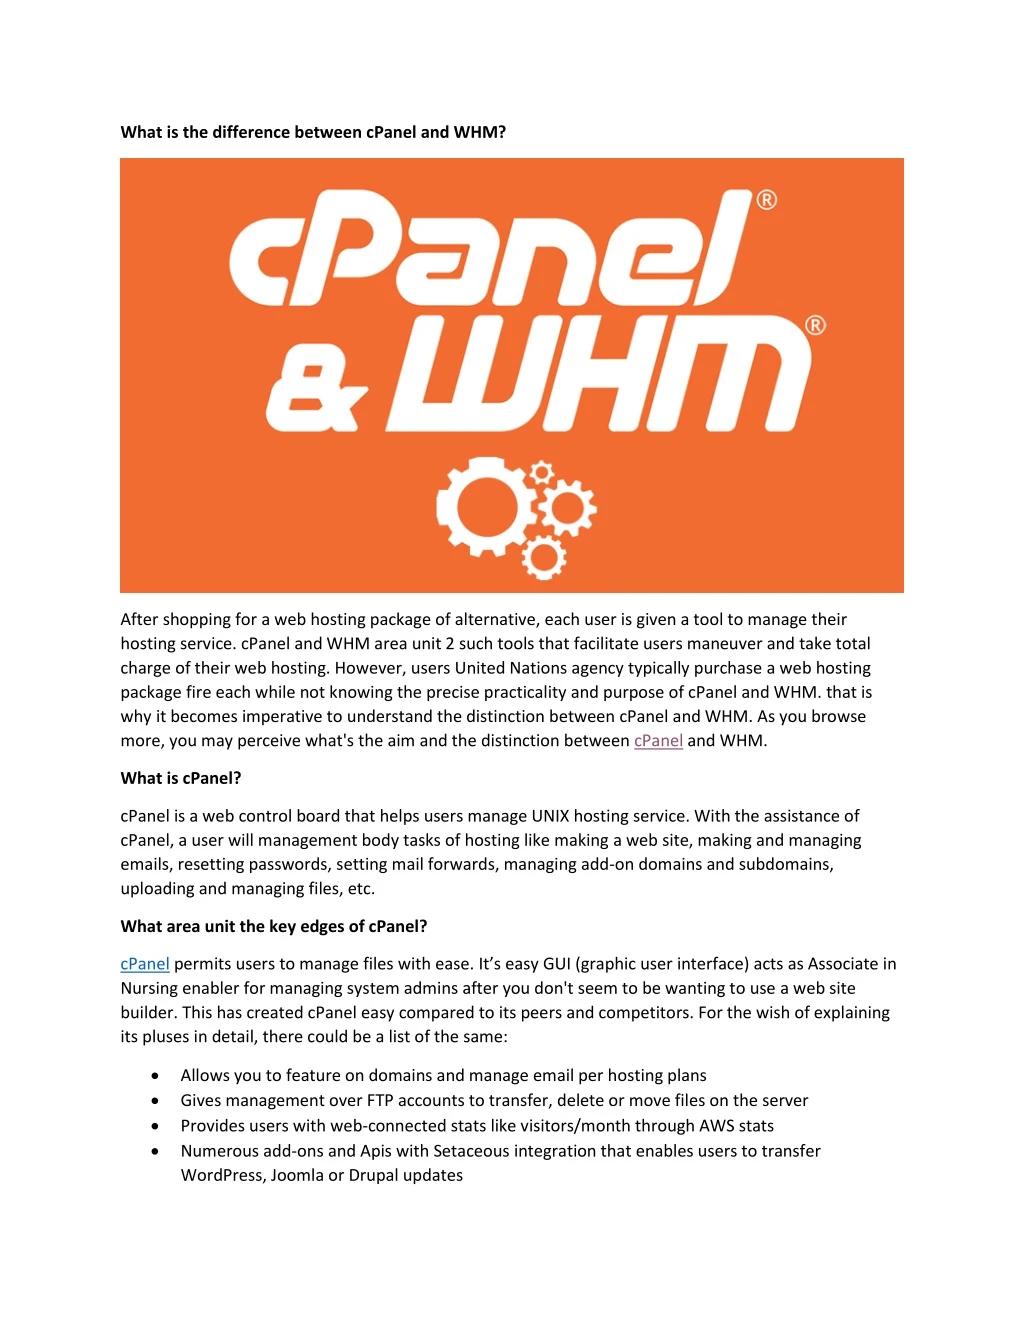 what is the difference between cpanel and whm